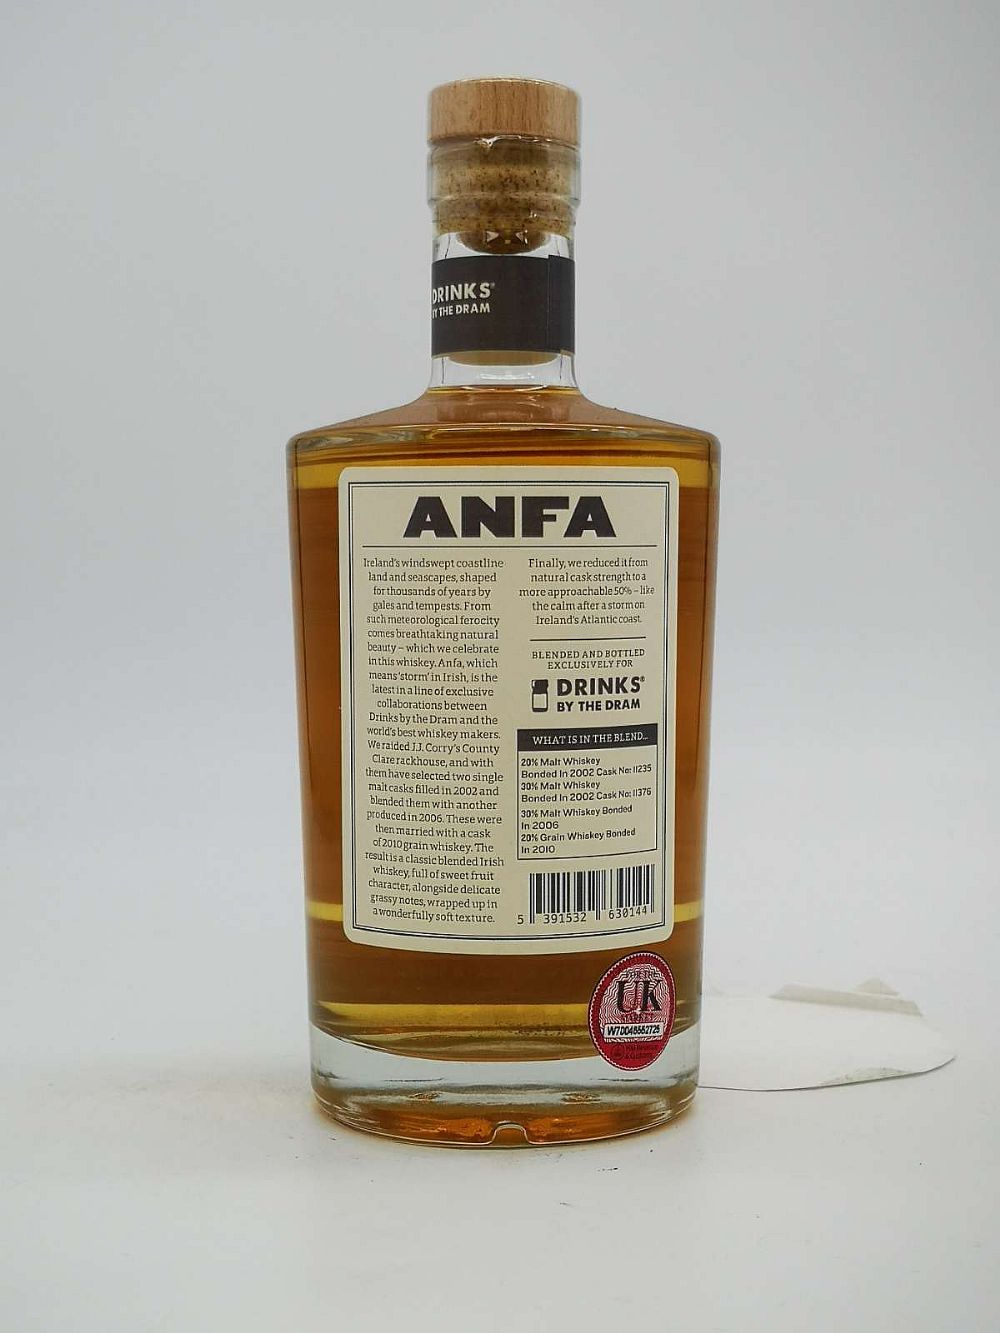 JJ Corry Drinks by the Dram, Anfa